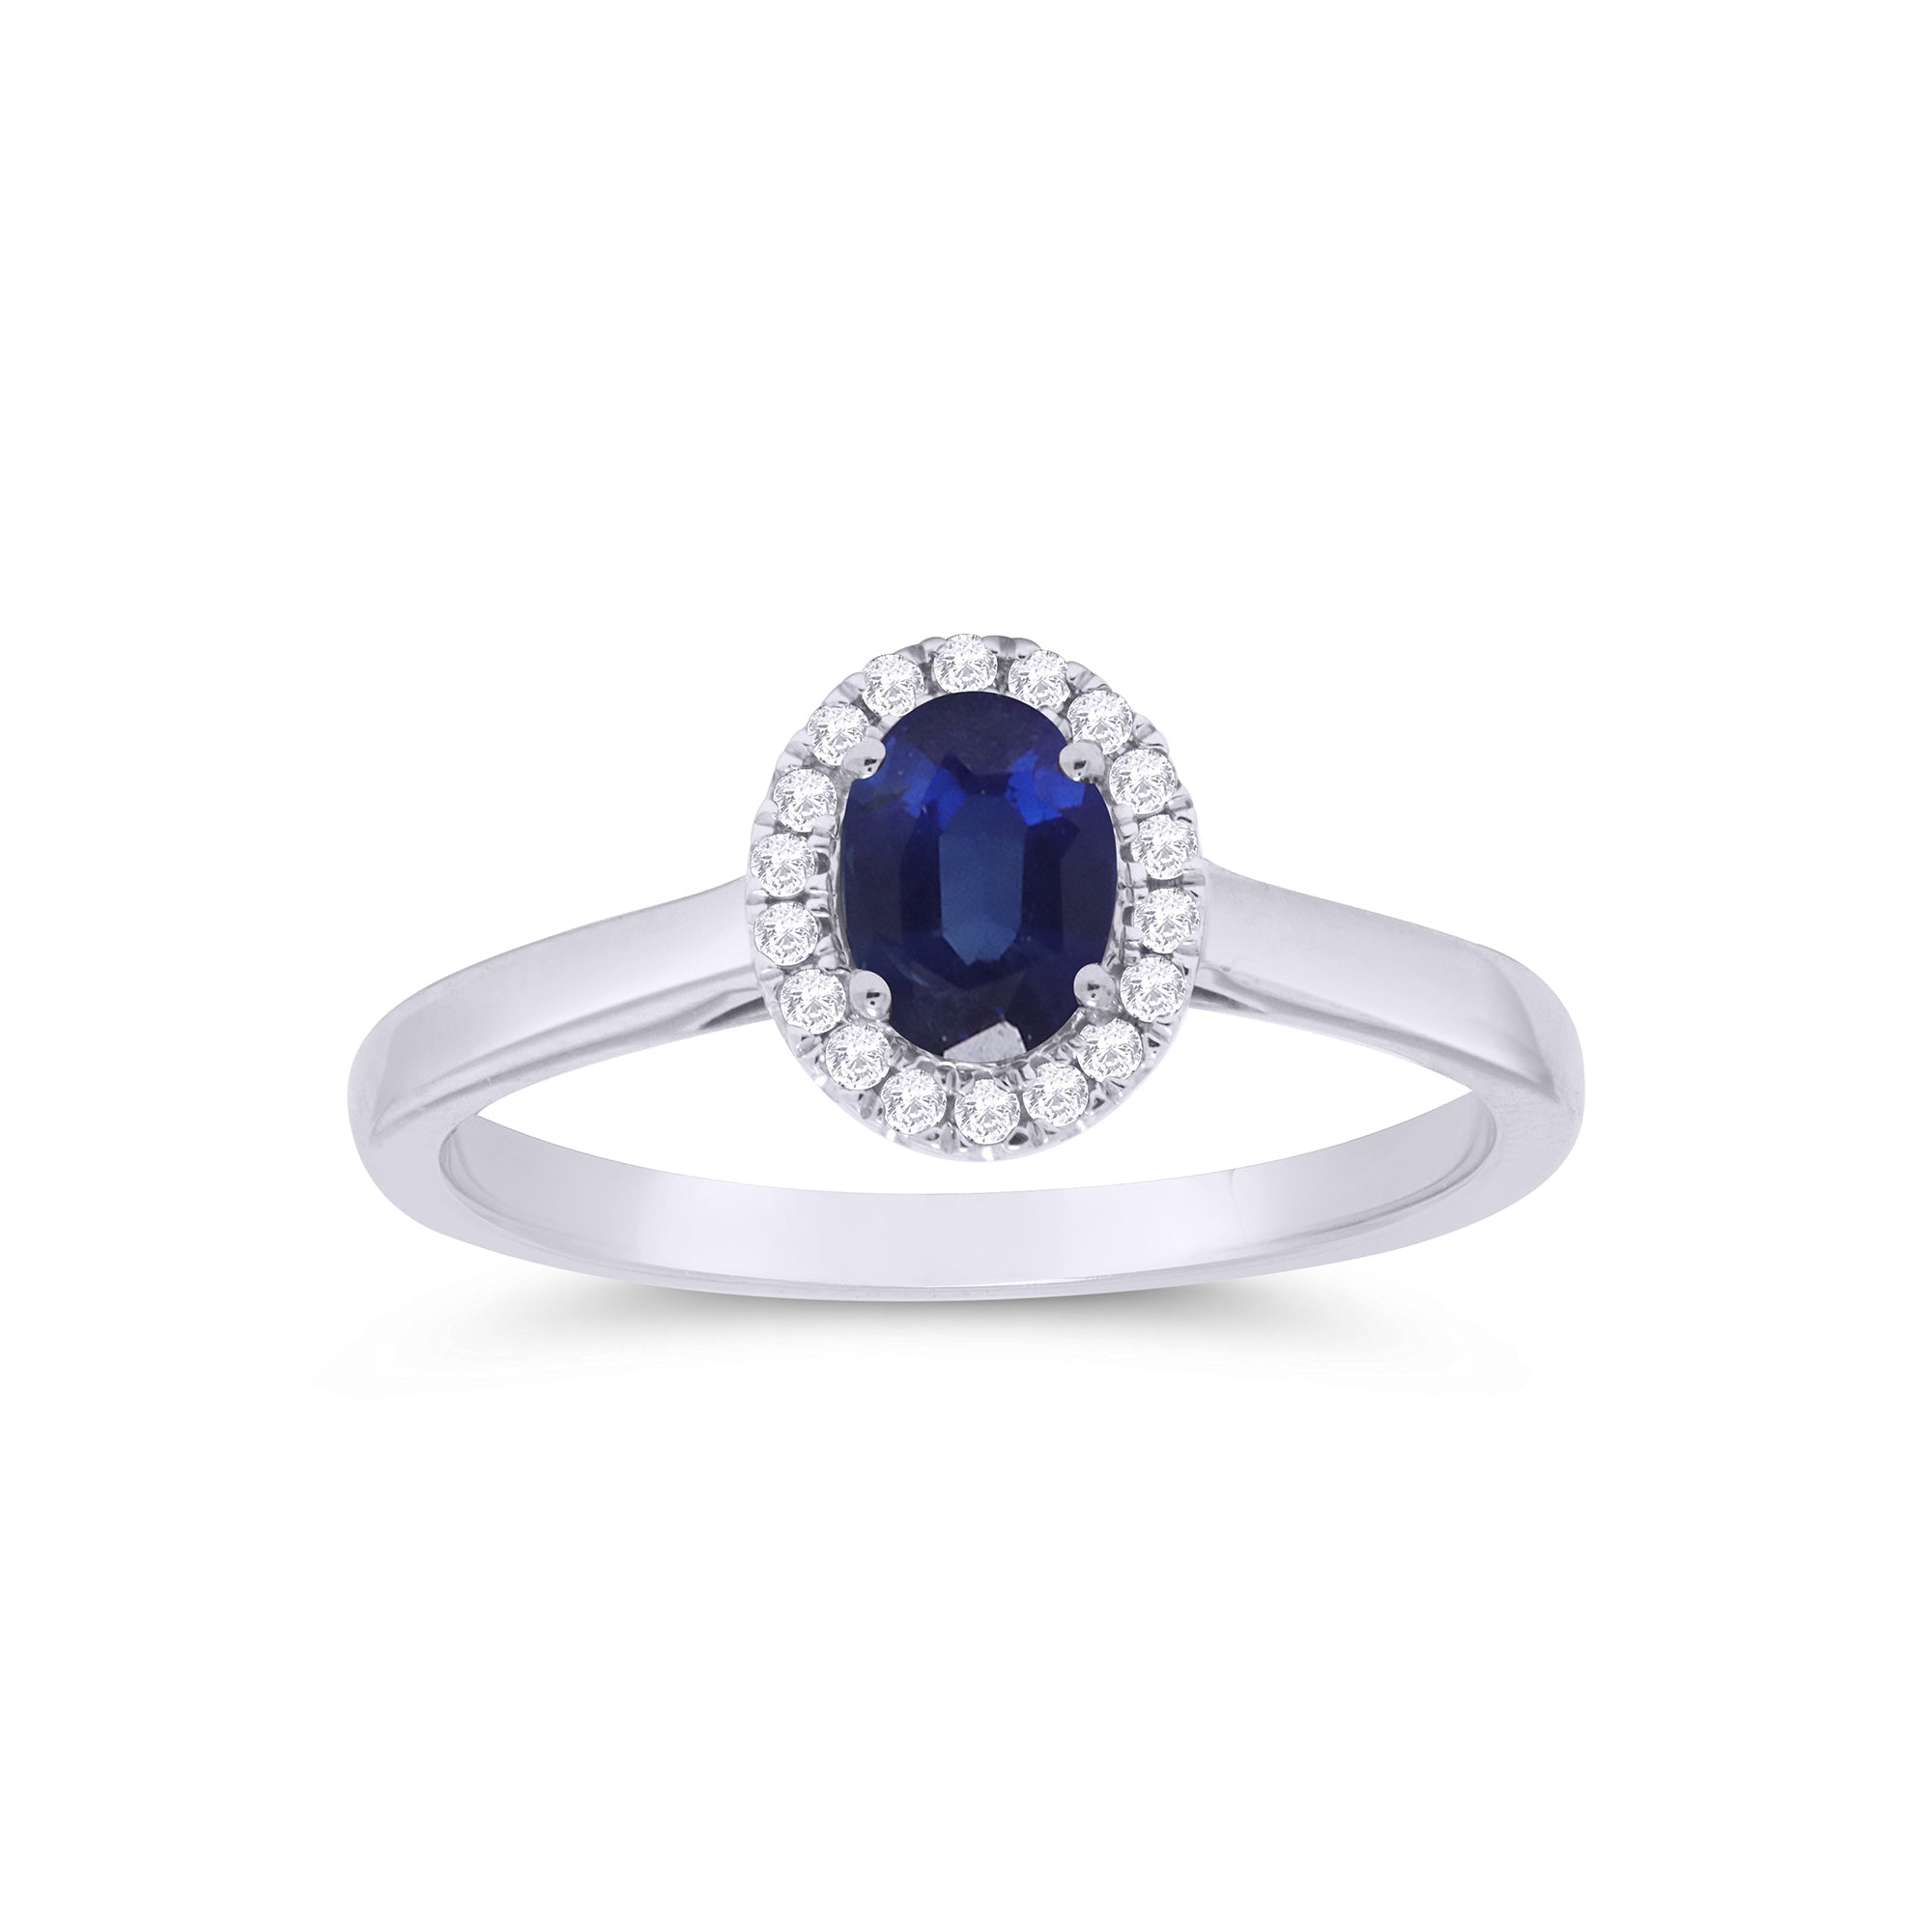 9ct white gold 6x4mm oval sapphire & diamond cluster ring 0.10ct